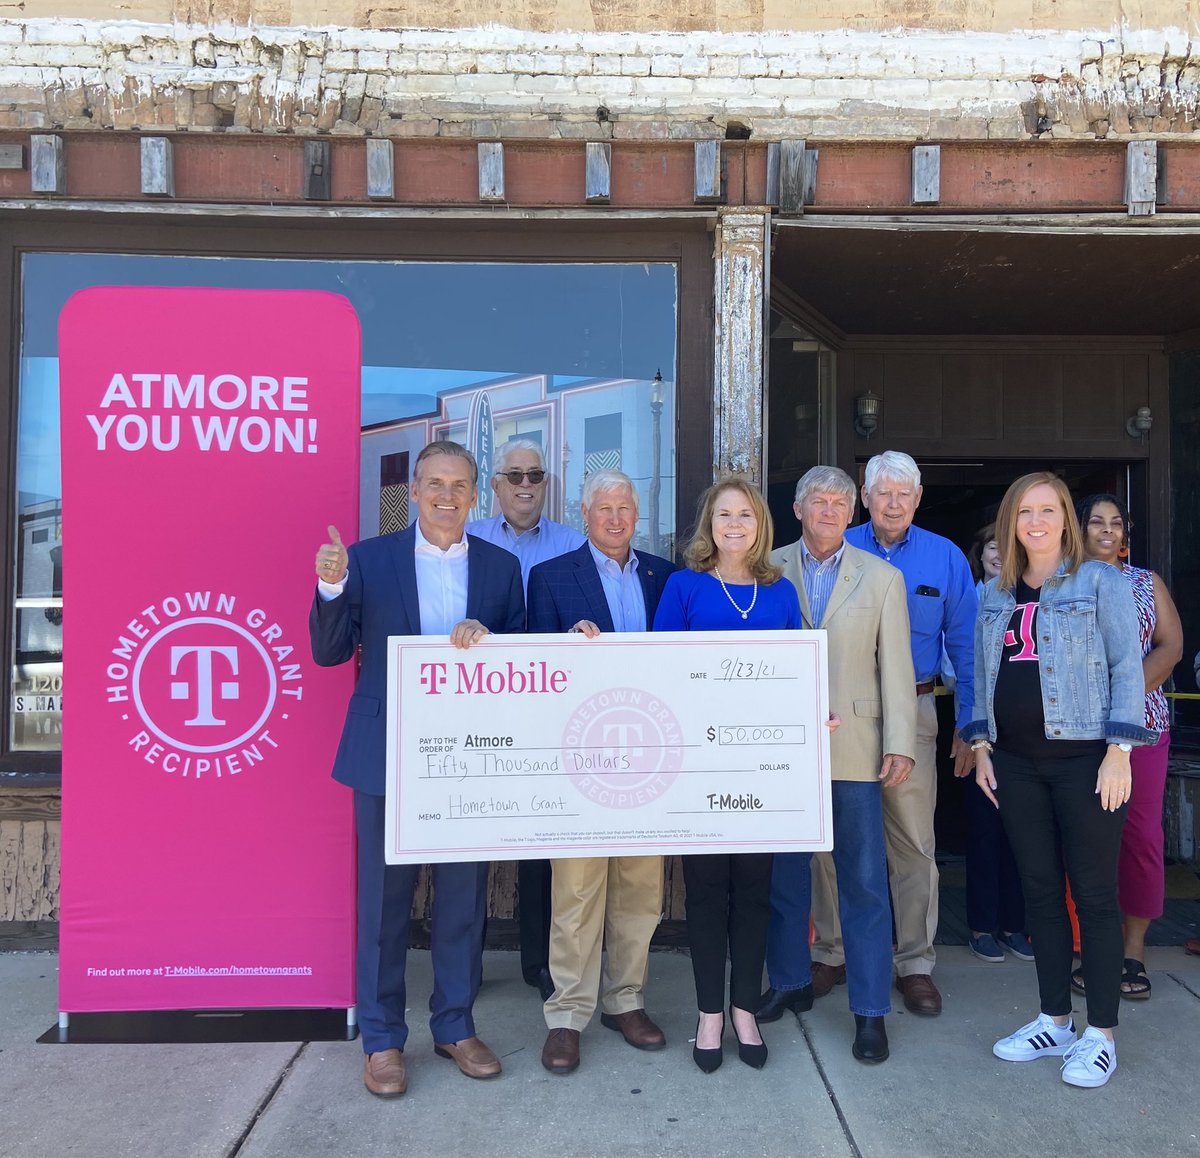 It was a pleasure to present a check to the city of Atmore today on behalf of @TMobile to provide a computer and technology lab for the city! @JonFreier @MikeSievert @MikeBelcher4 #tmobile #hometowngrants #atmoreal #ruralamerica